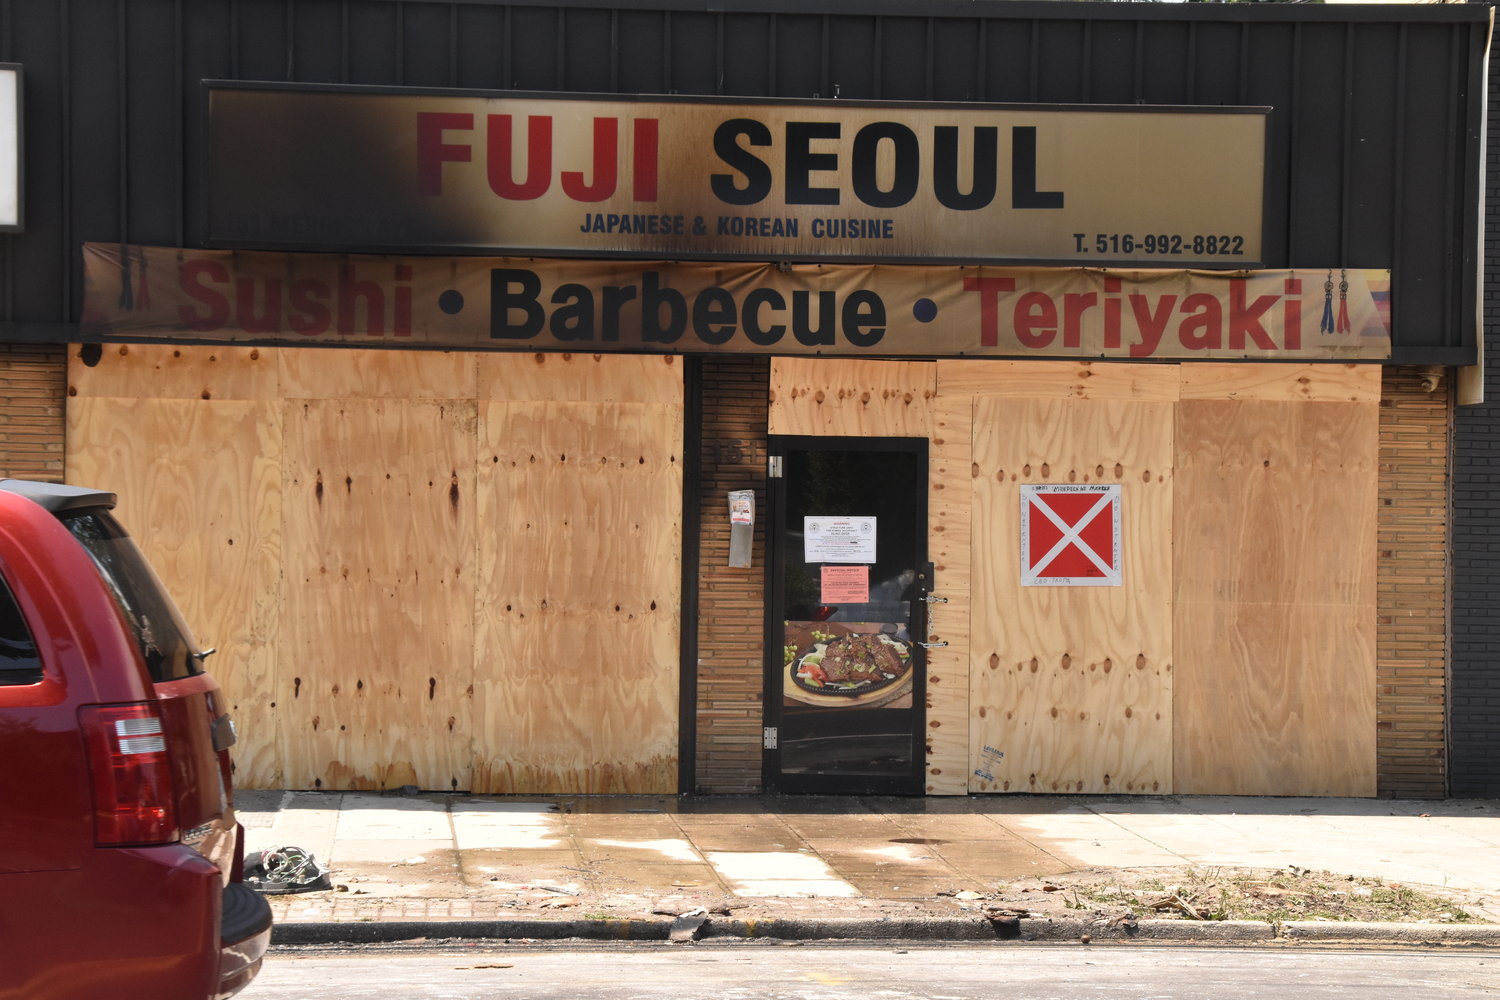 On Thursday, Fuji Seoul was boarded up as a result of the damages.